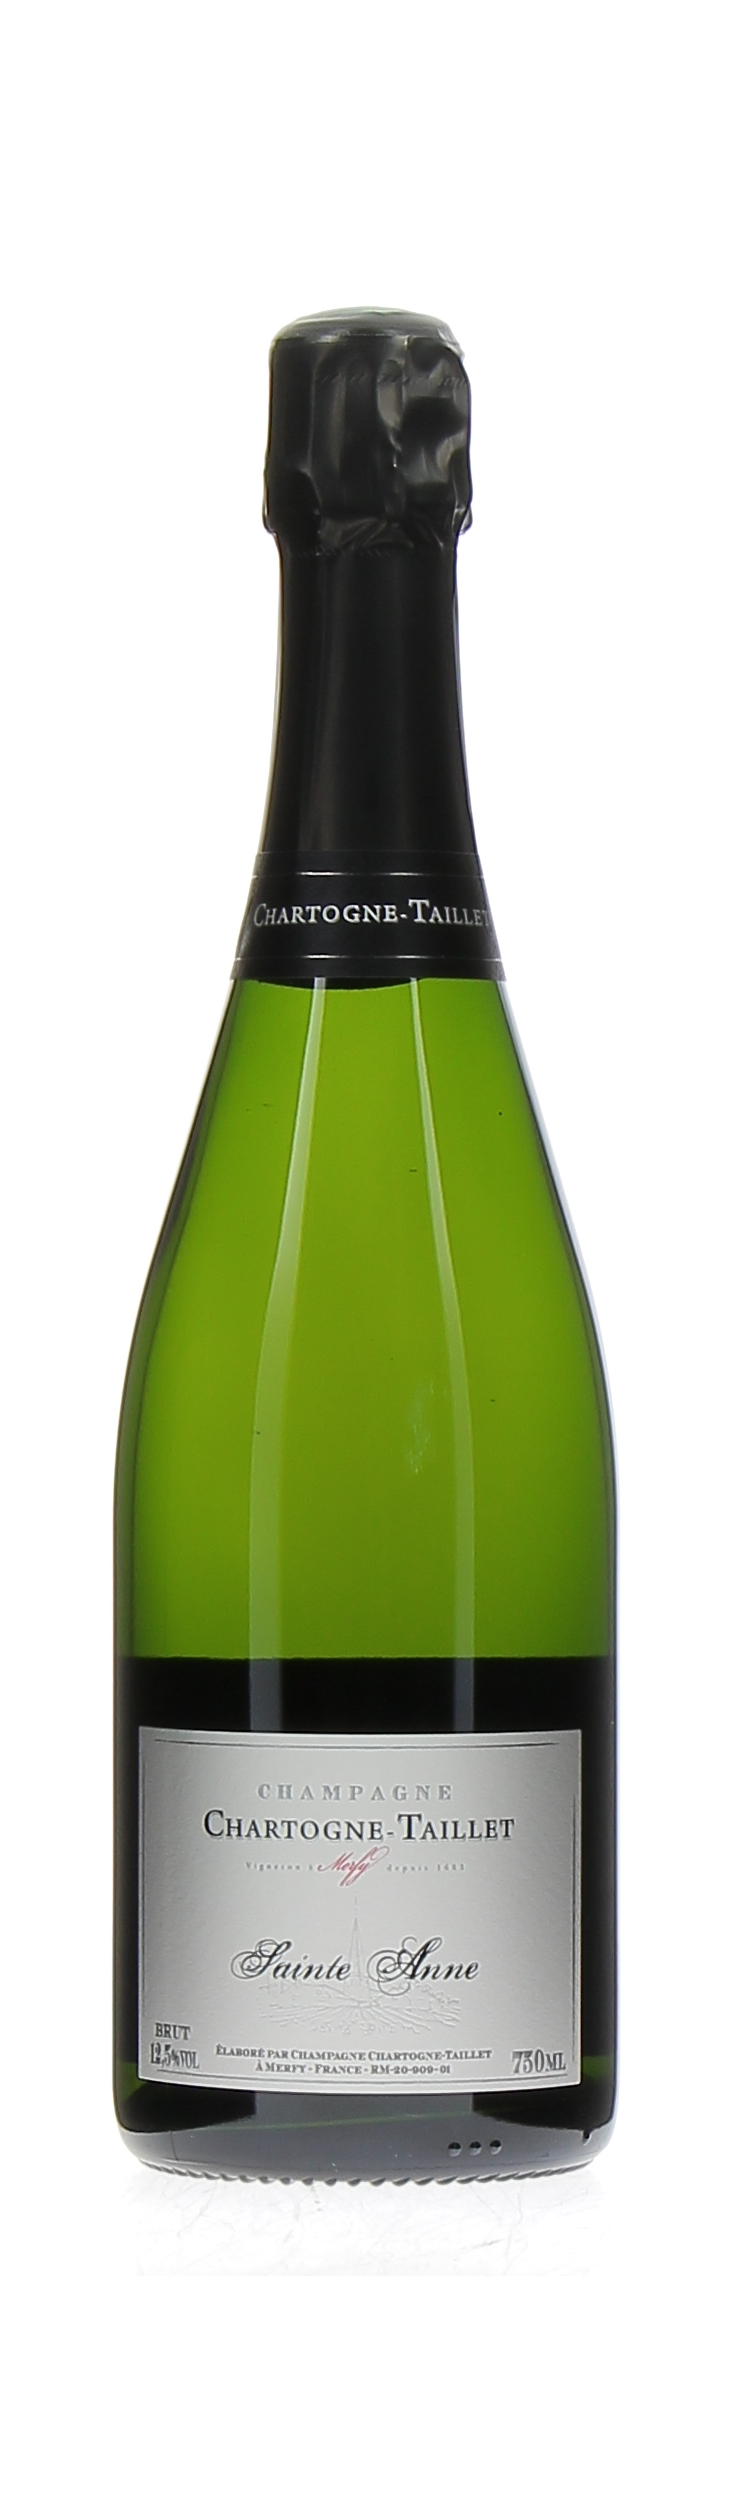 Champagne - Chartogne-Taillet 